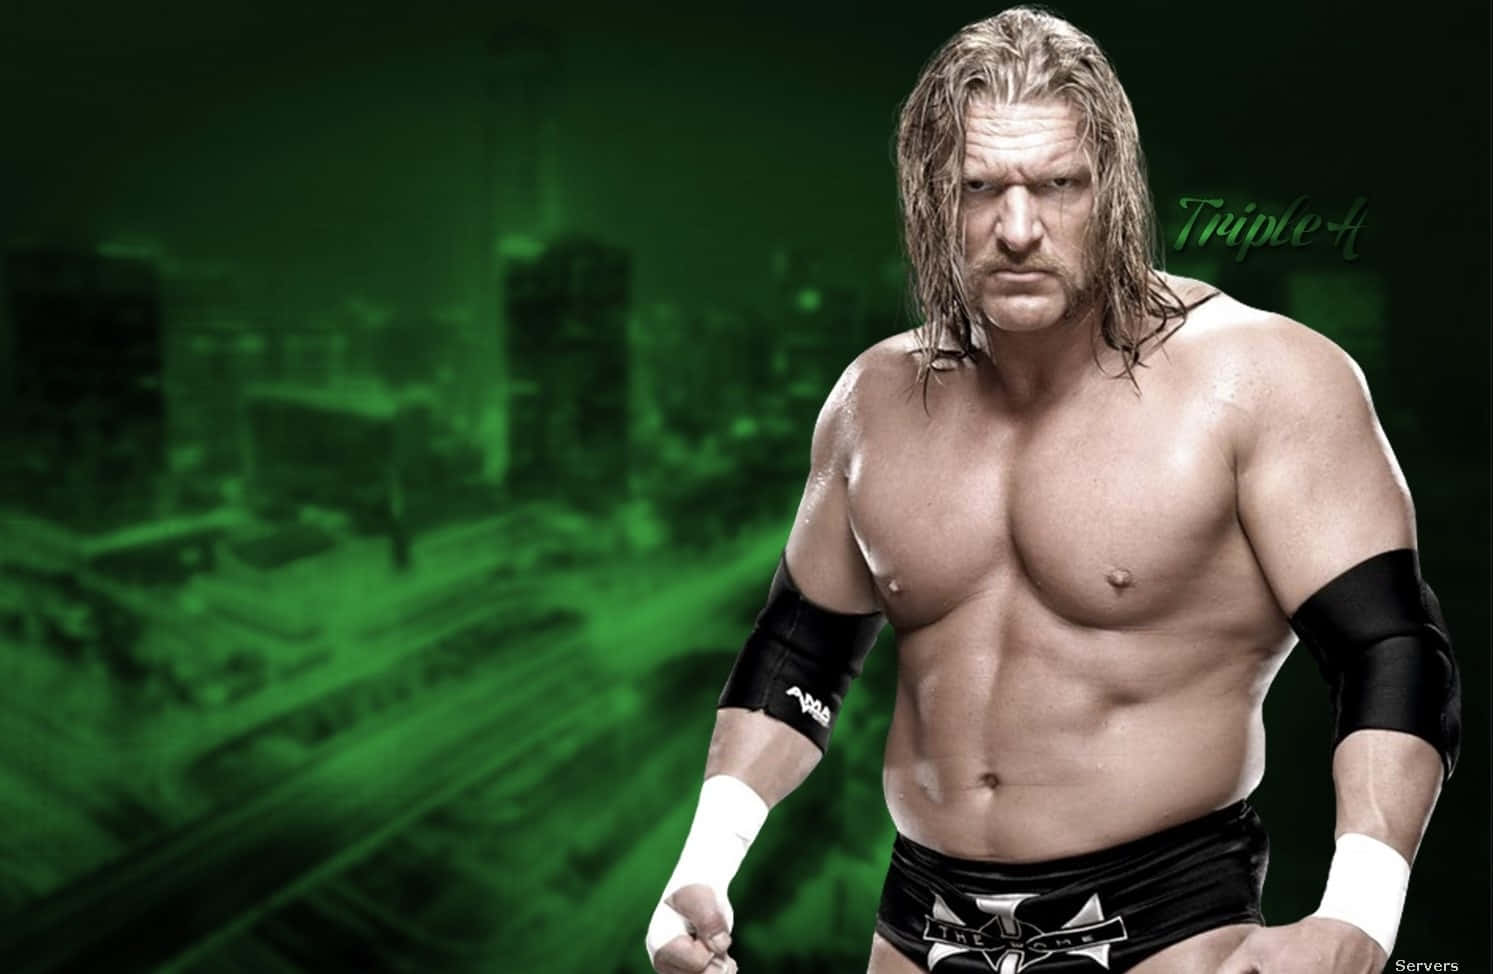 Tripleh Muskulösa Fysik (when Referring To A Computer Or Mobile Wallpaper Featuring Triple H With His Muscular Physique) Wallpaper